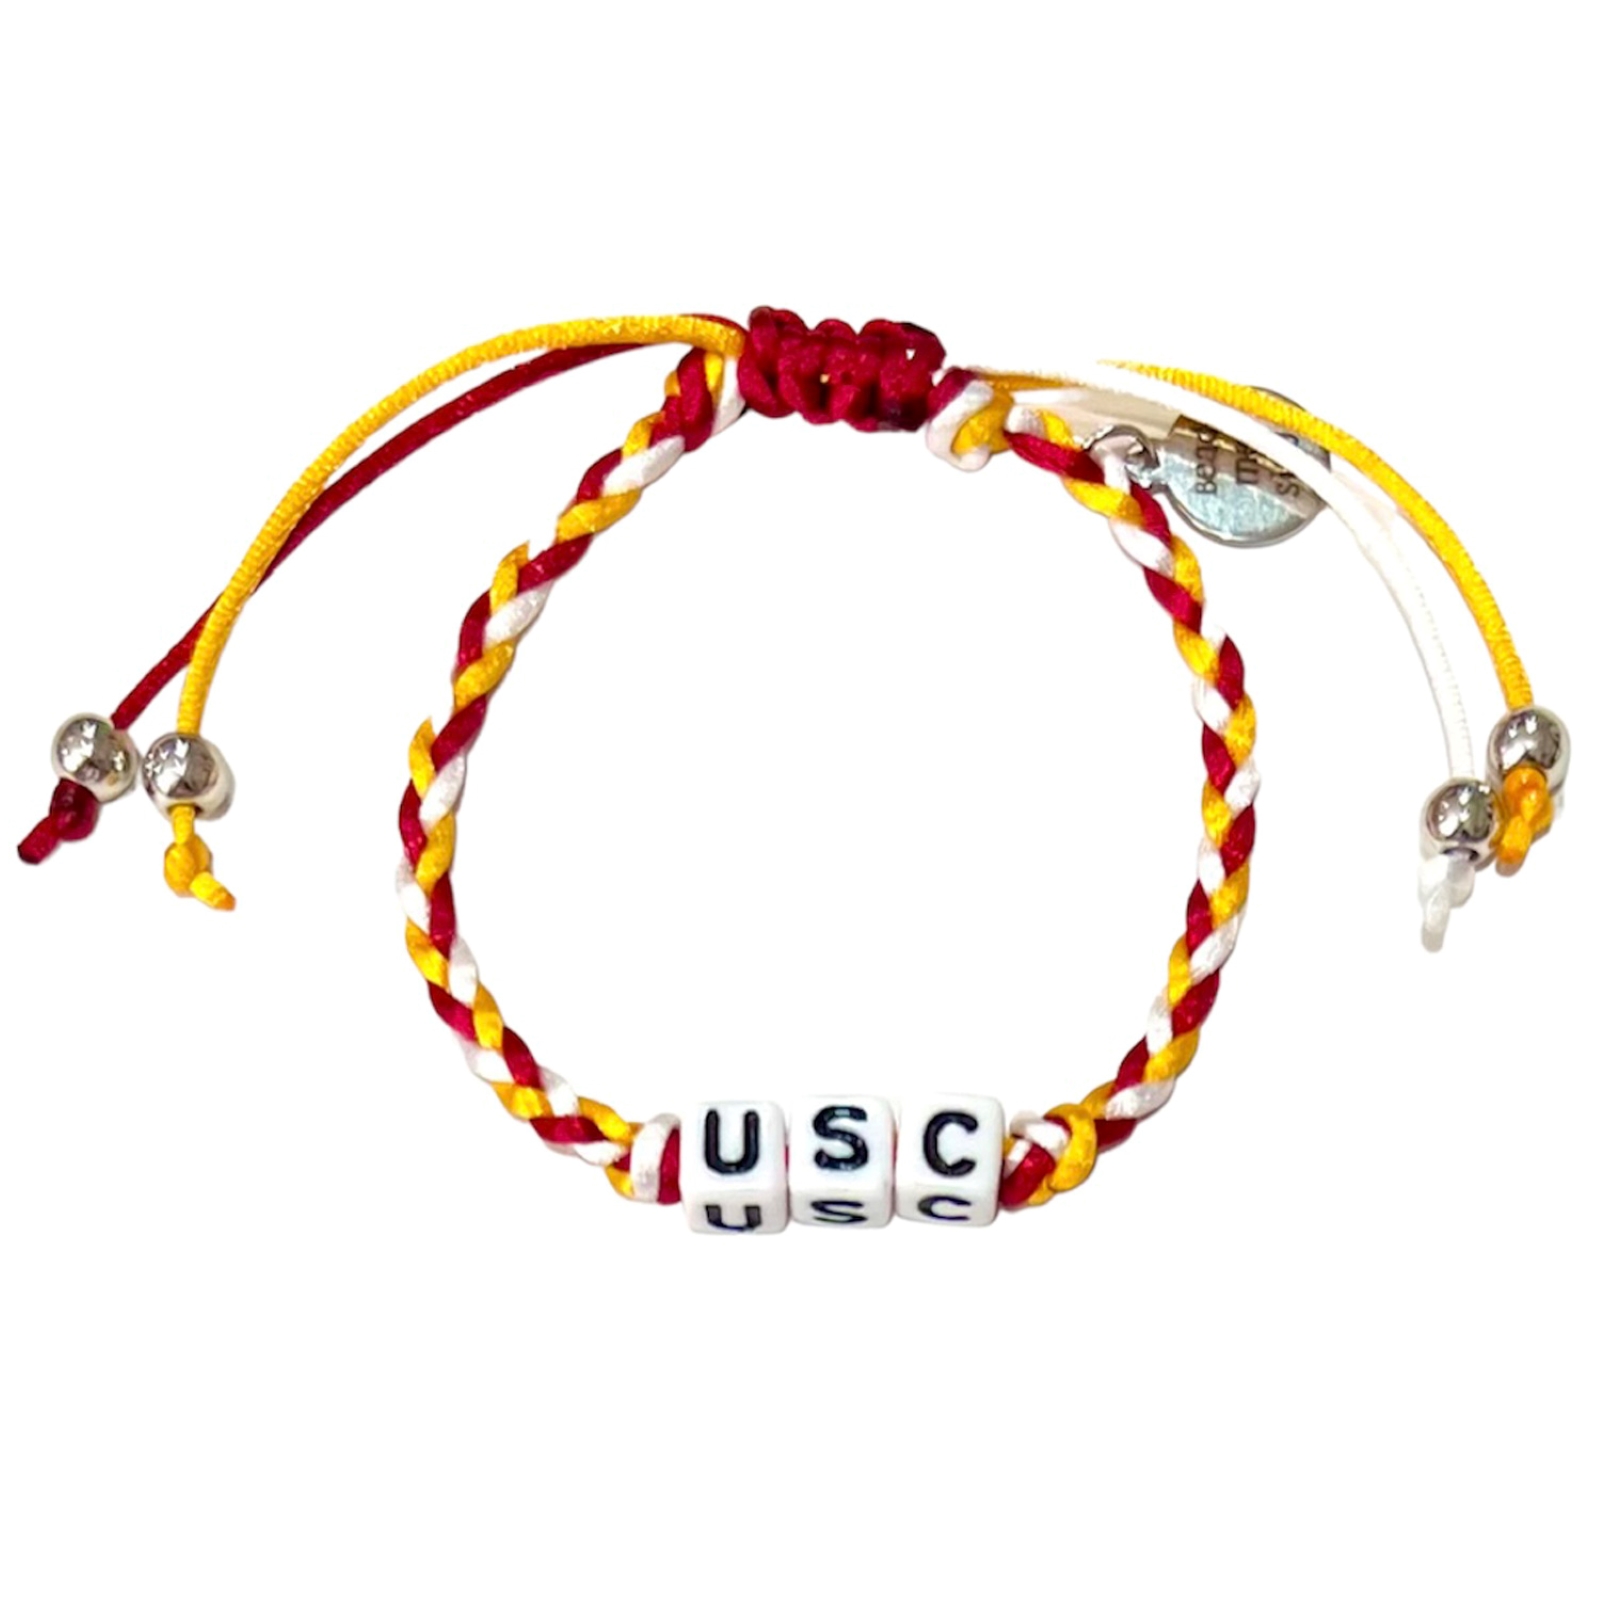 USC Small Braid Bracelet by Bead Me Silly image01